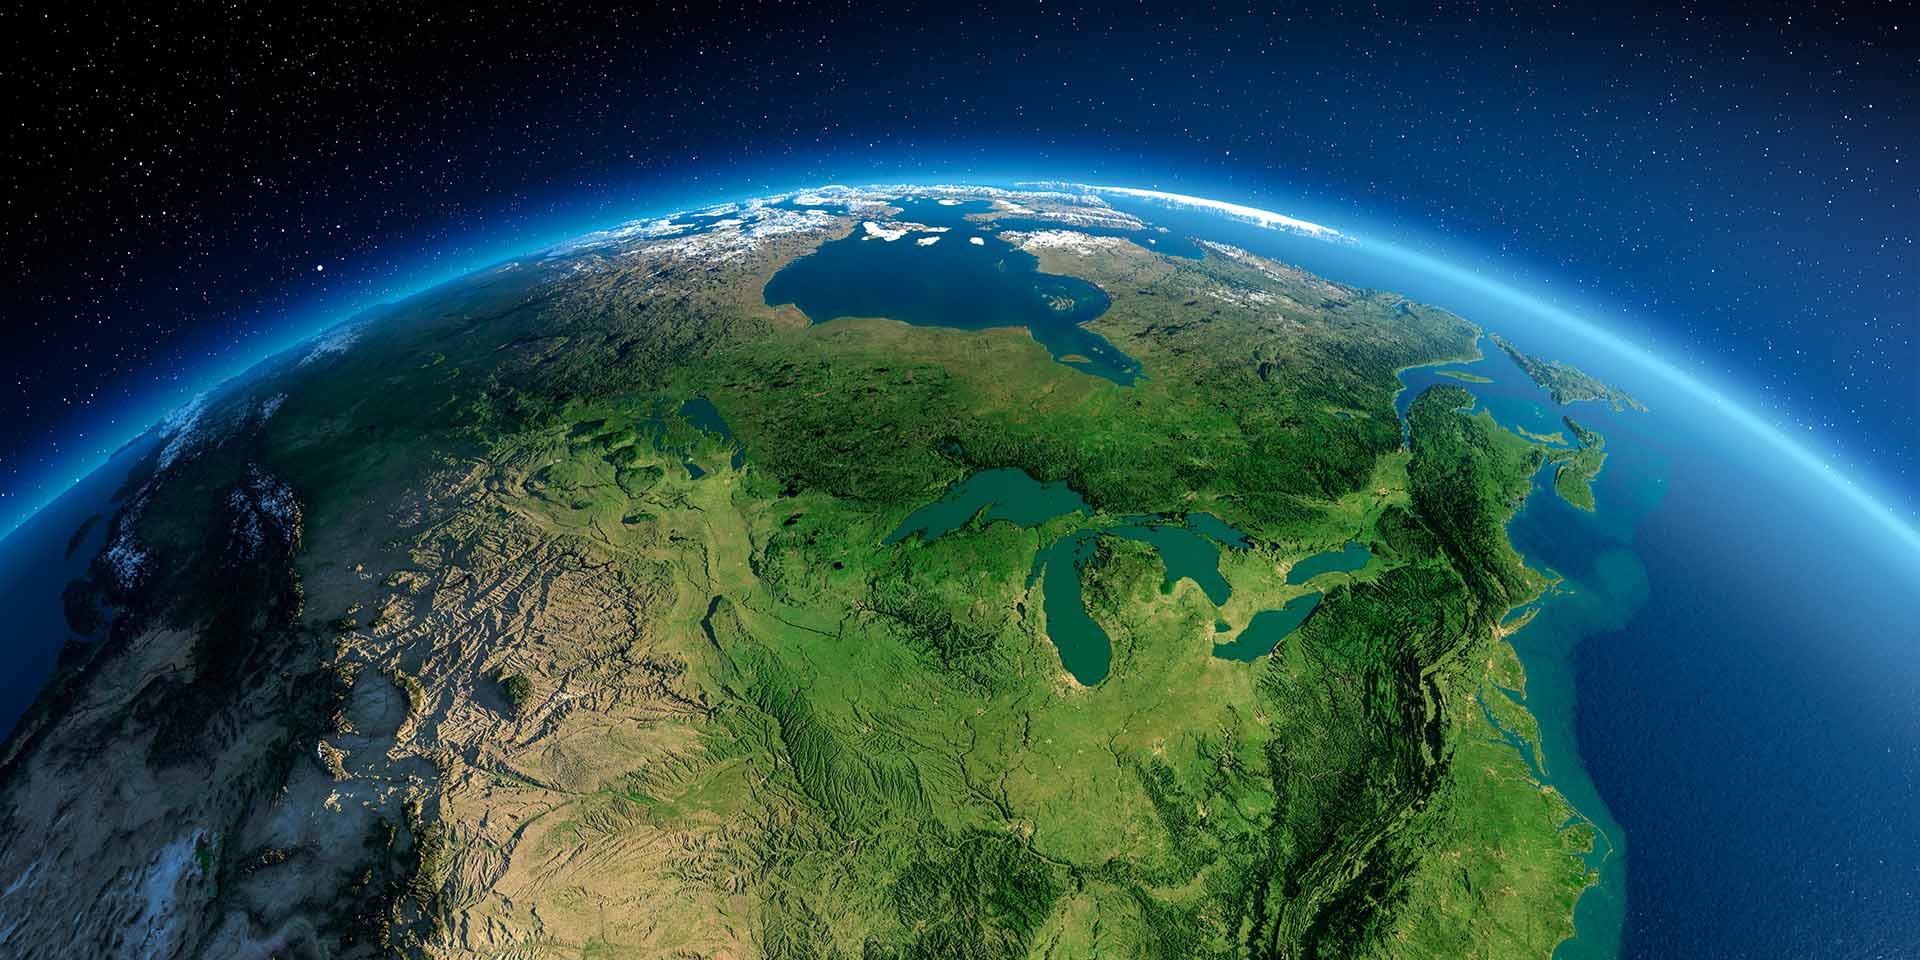 Image of Canada from space